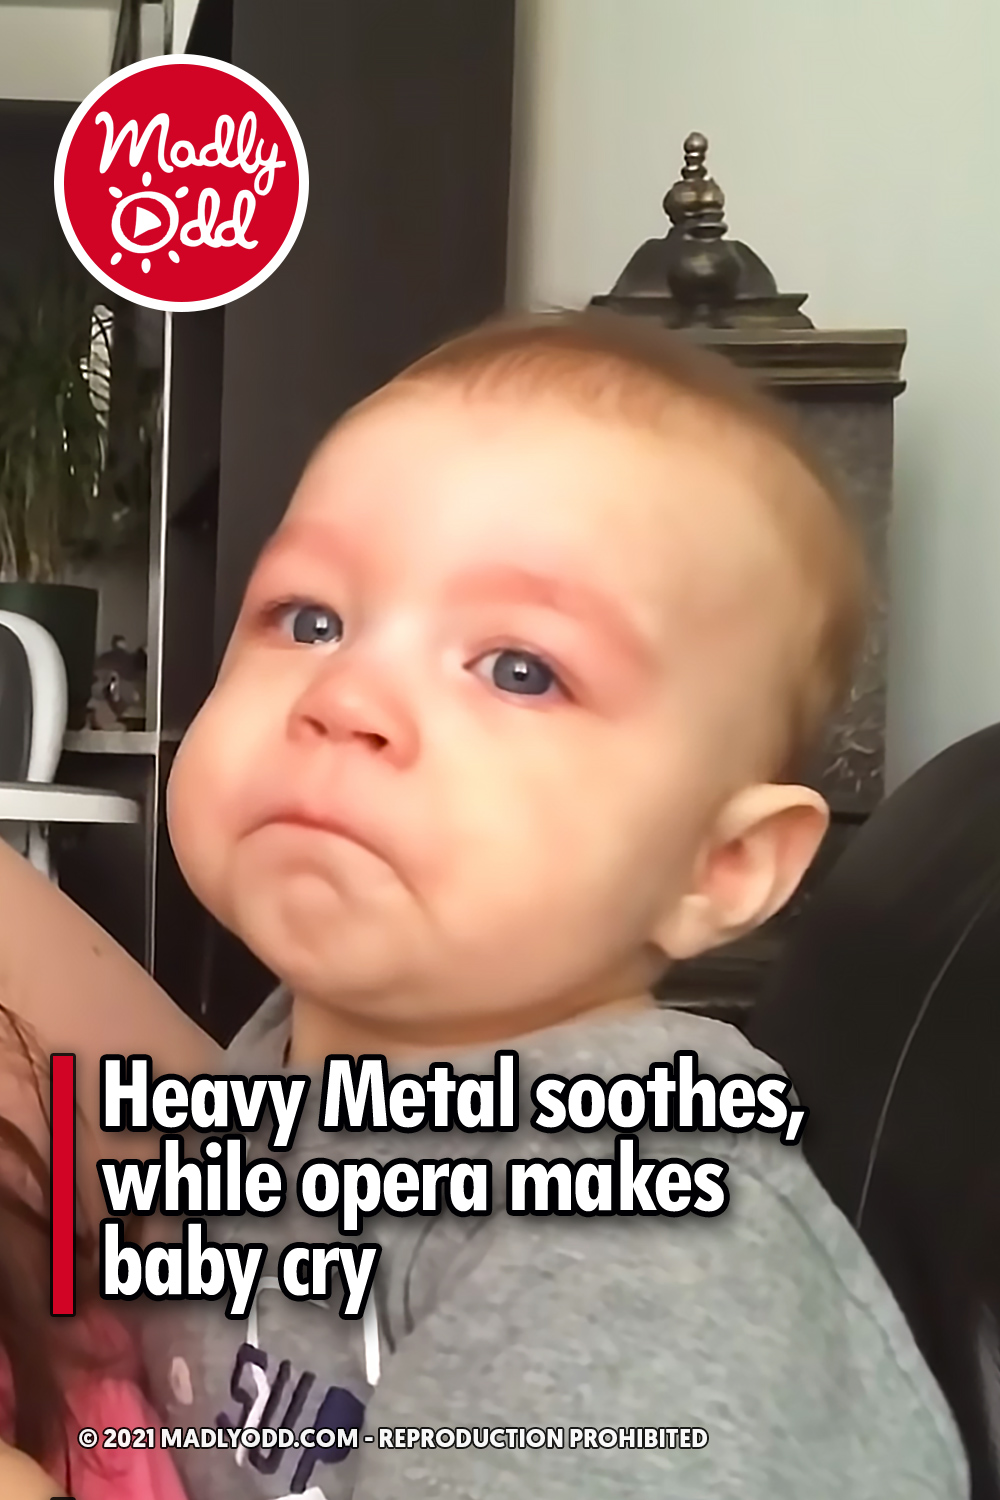 Heavy Metal soothes, while opera makes baby cry